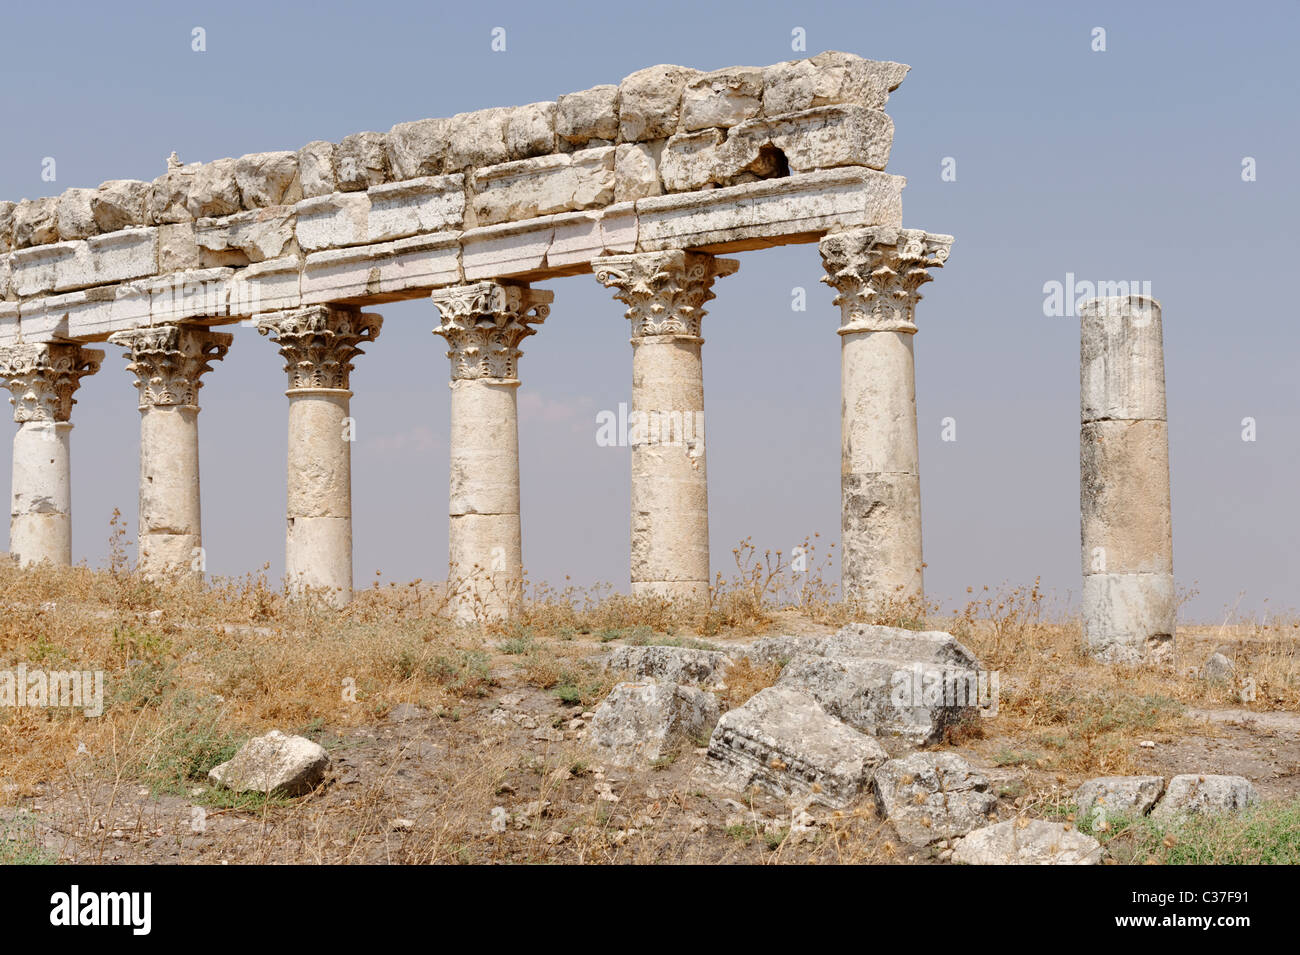 Columns along the Colonnaded Street topped with elaborate entablature with acanthus capitals in the ancient city of Apamea. Stock Photo